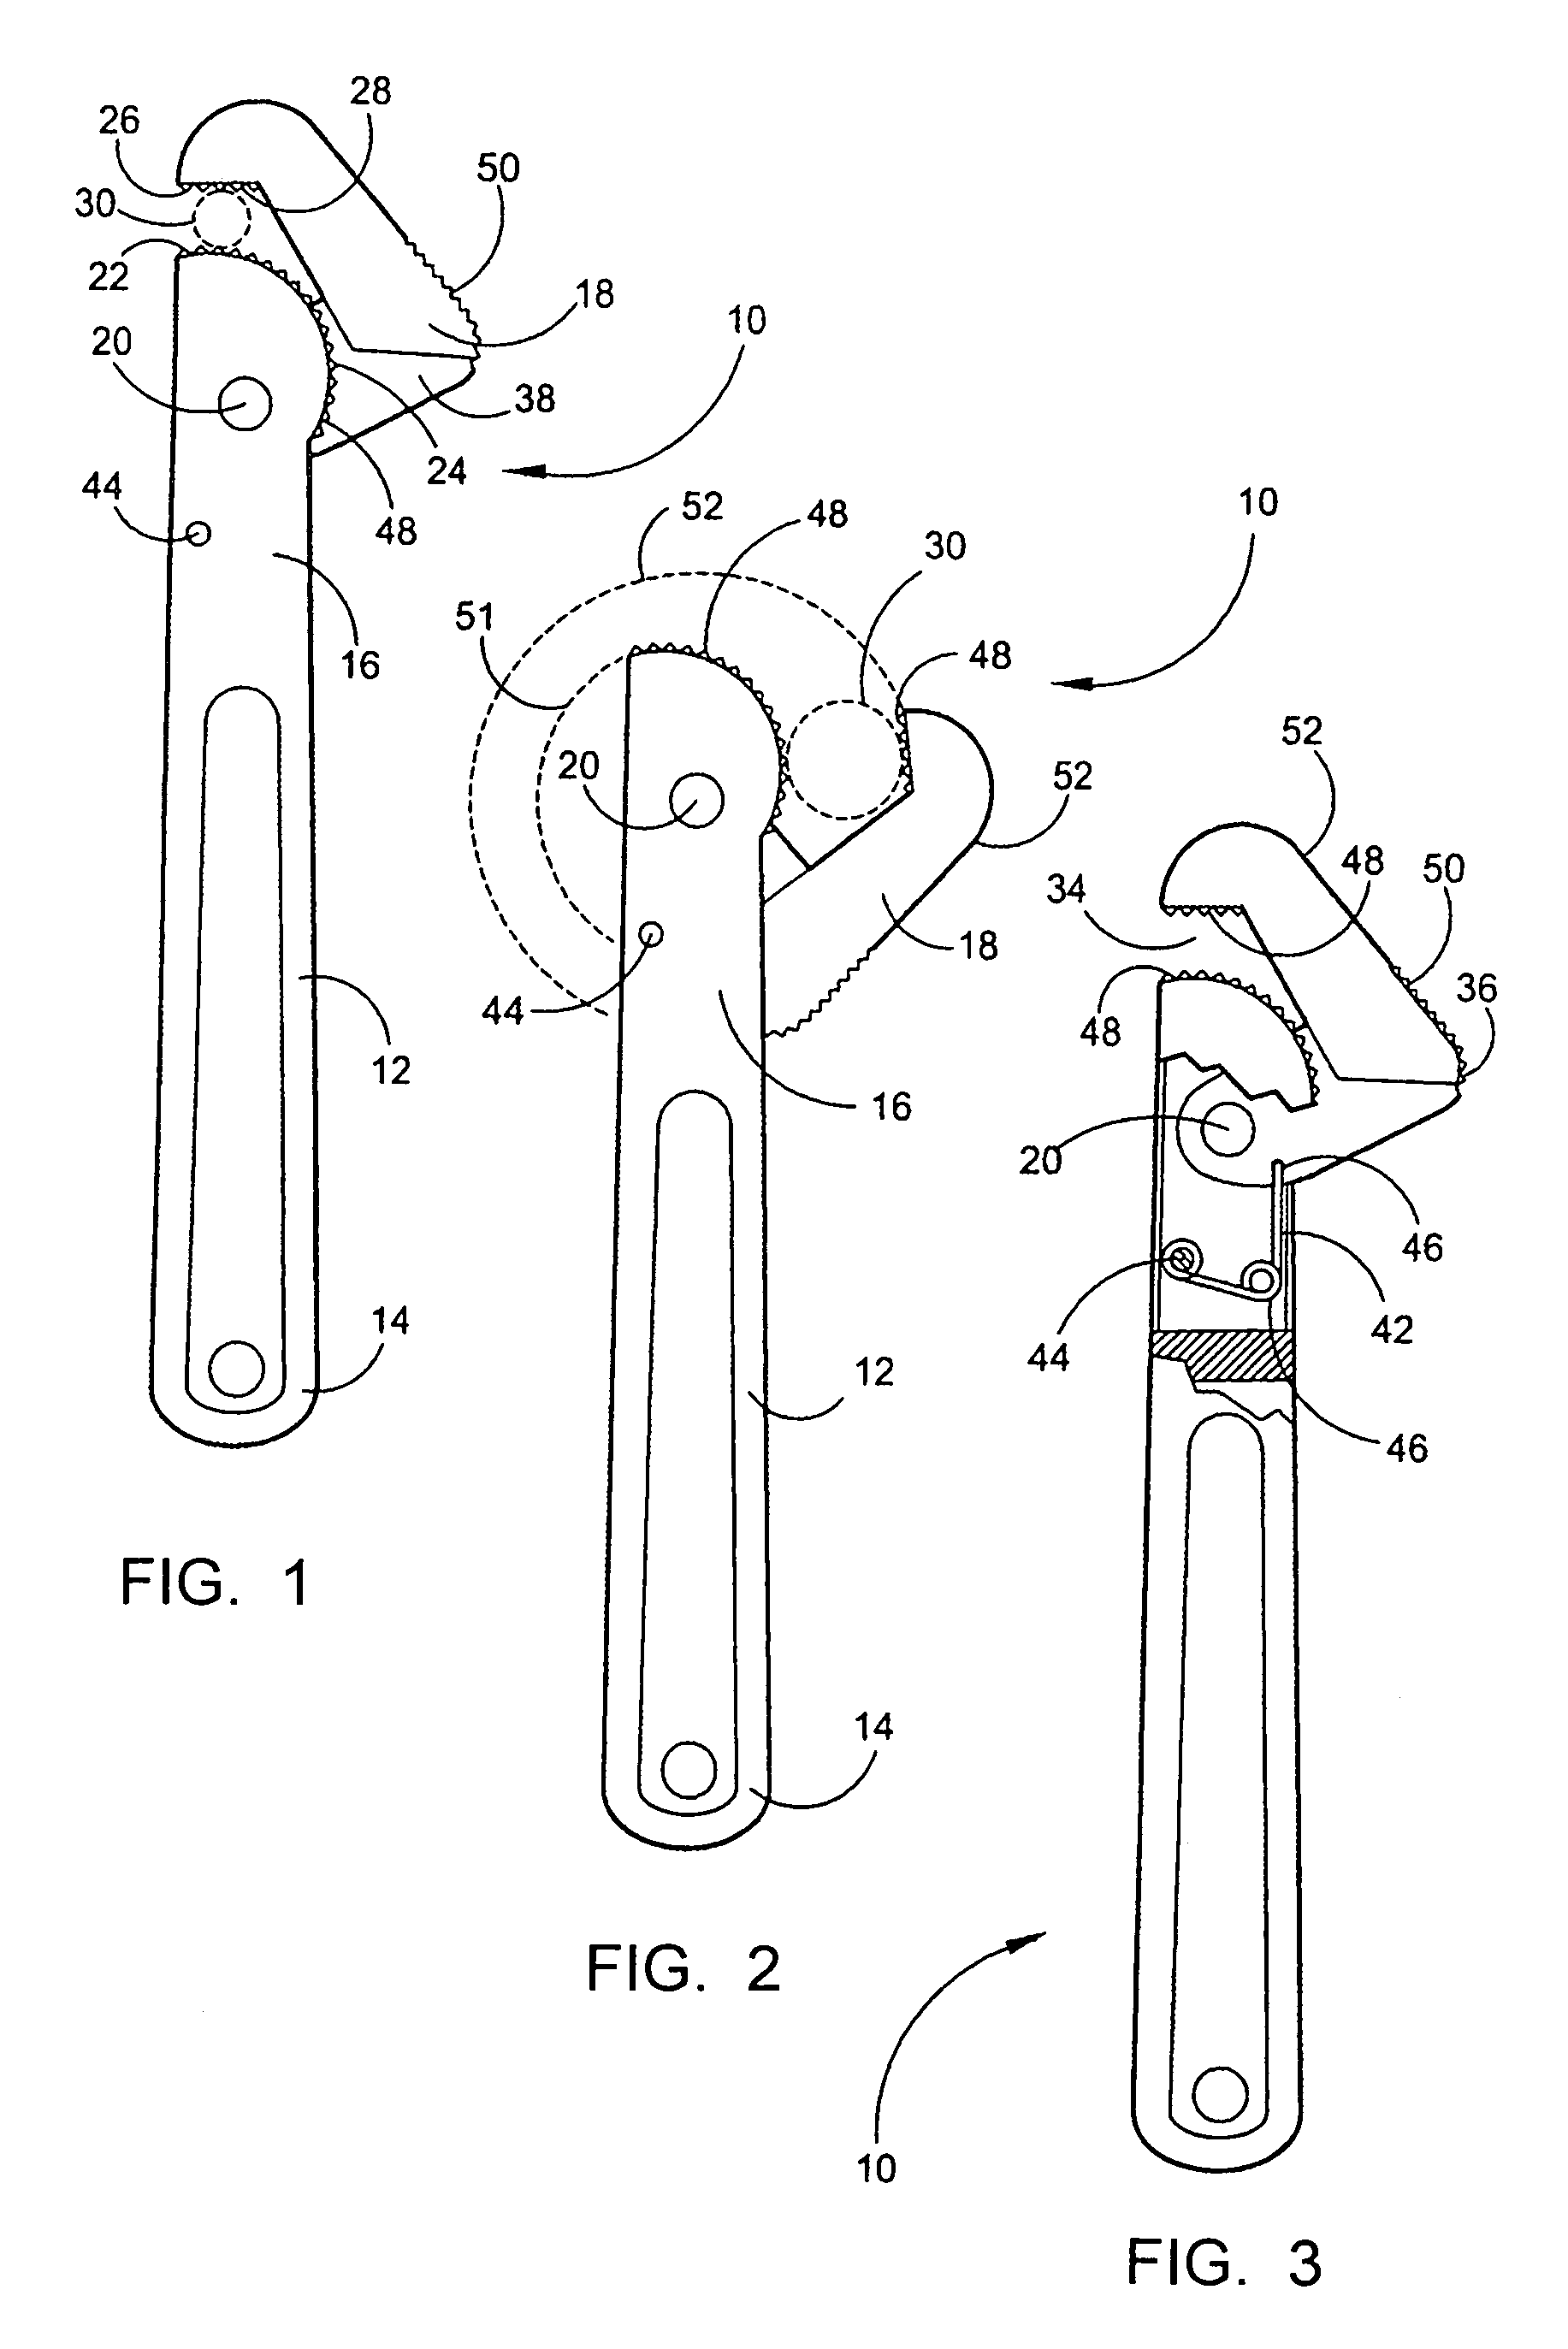 Automatically adjusting self-tightening wrench